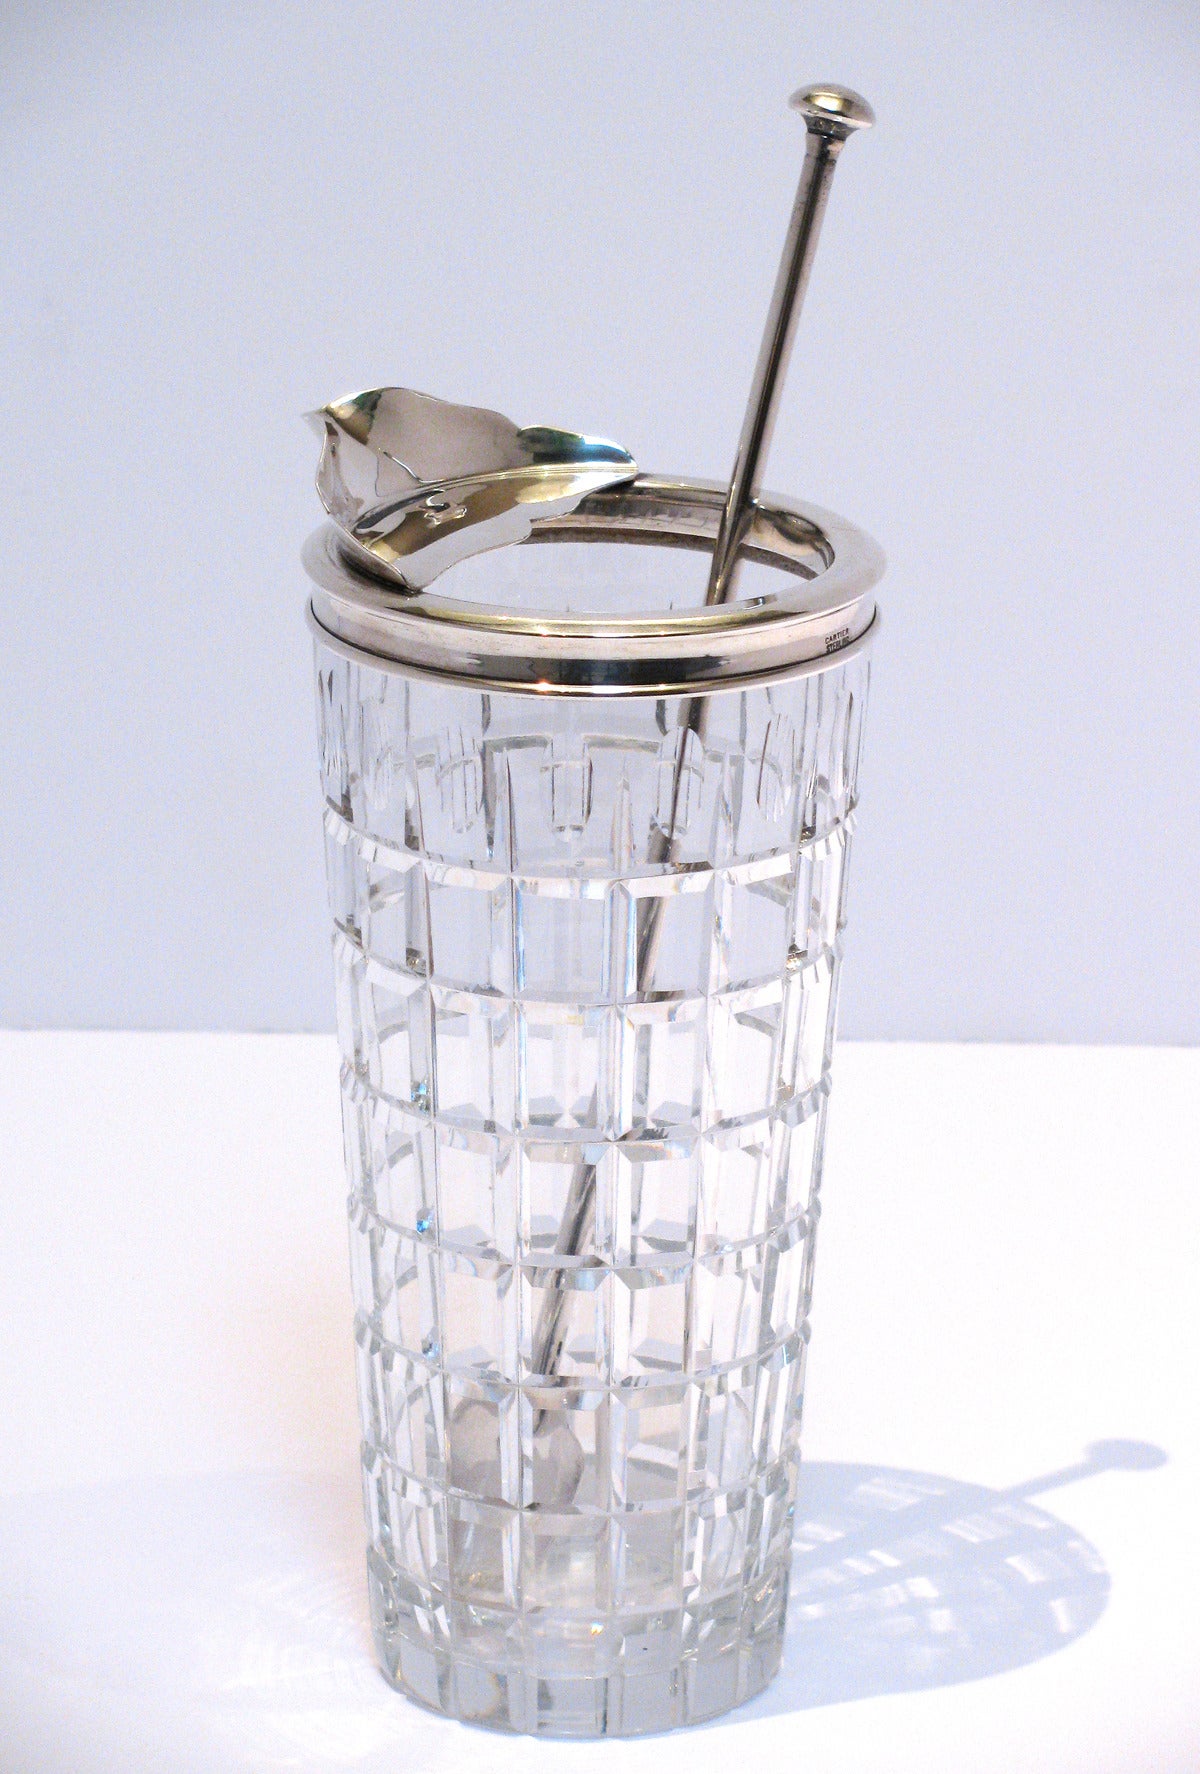 A cut crystal and sterling silver martini carafe with a sterling stirrer, by Cartier. Carafe is signed on silver rim, Cartier and has an etched hallmark on crystal base. Spoon stirrer is marked sterling.